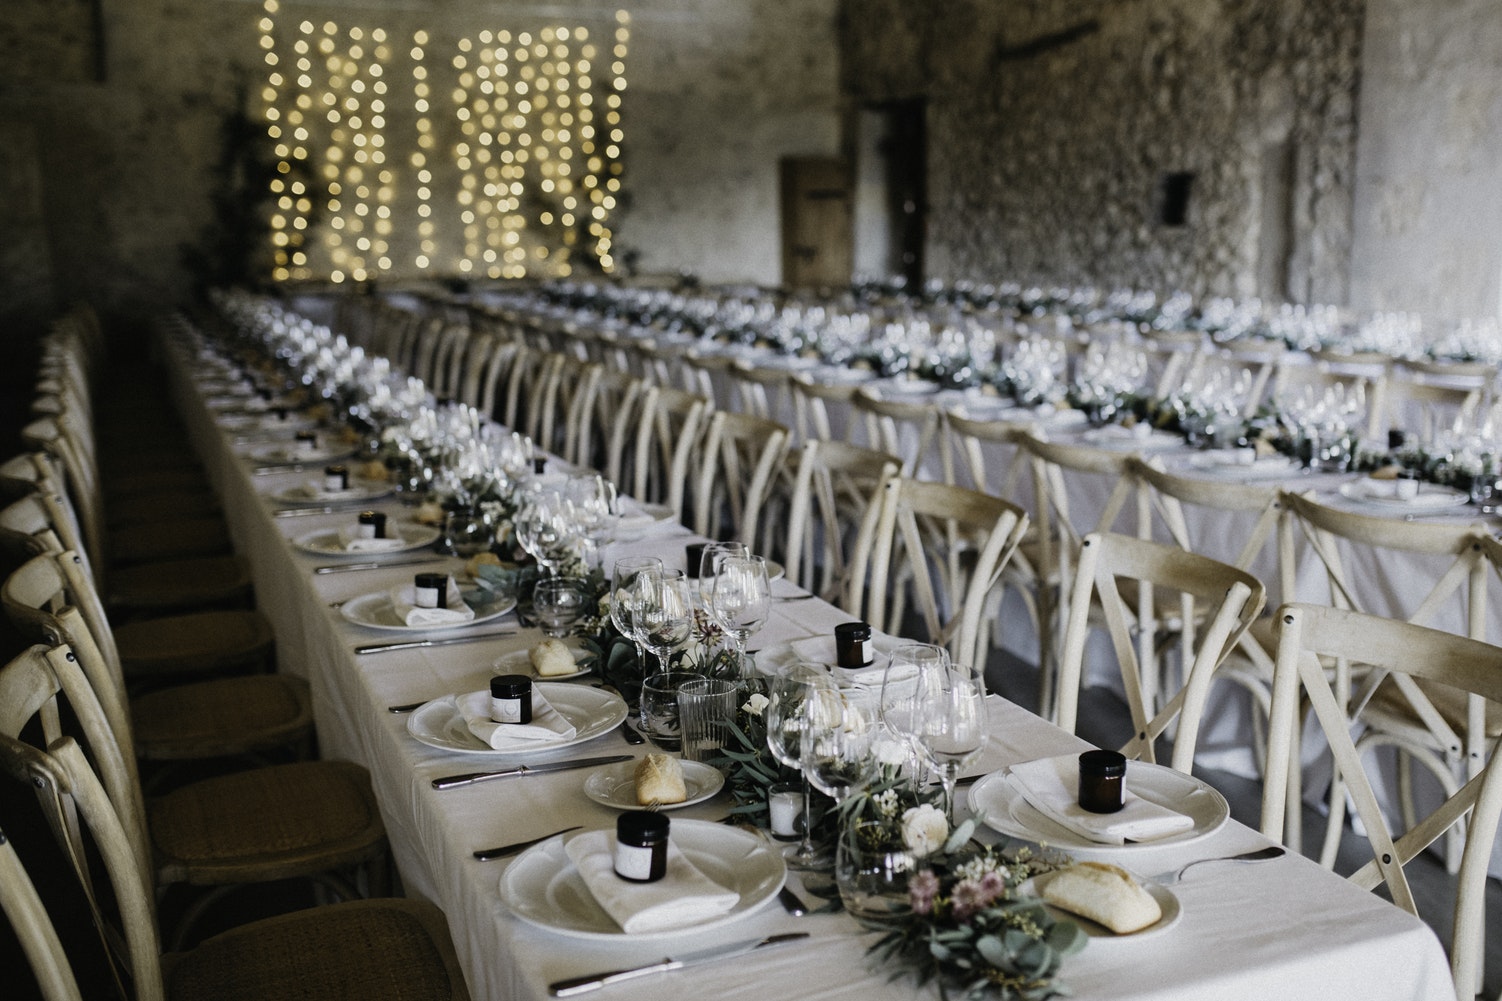 wedding venue - How to Avoid Sweating The Small Stuff While Planning Your Wedding